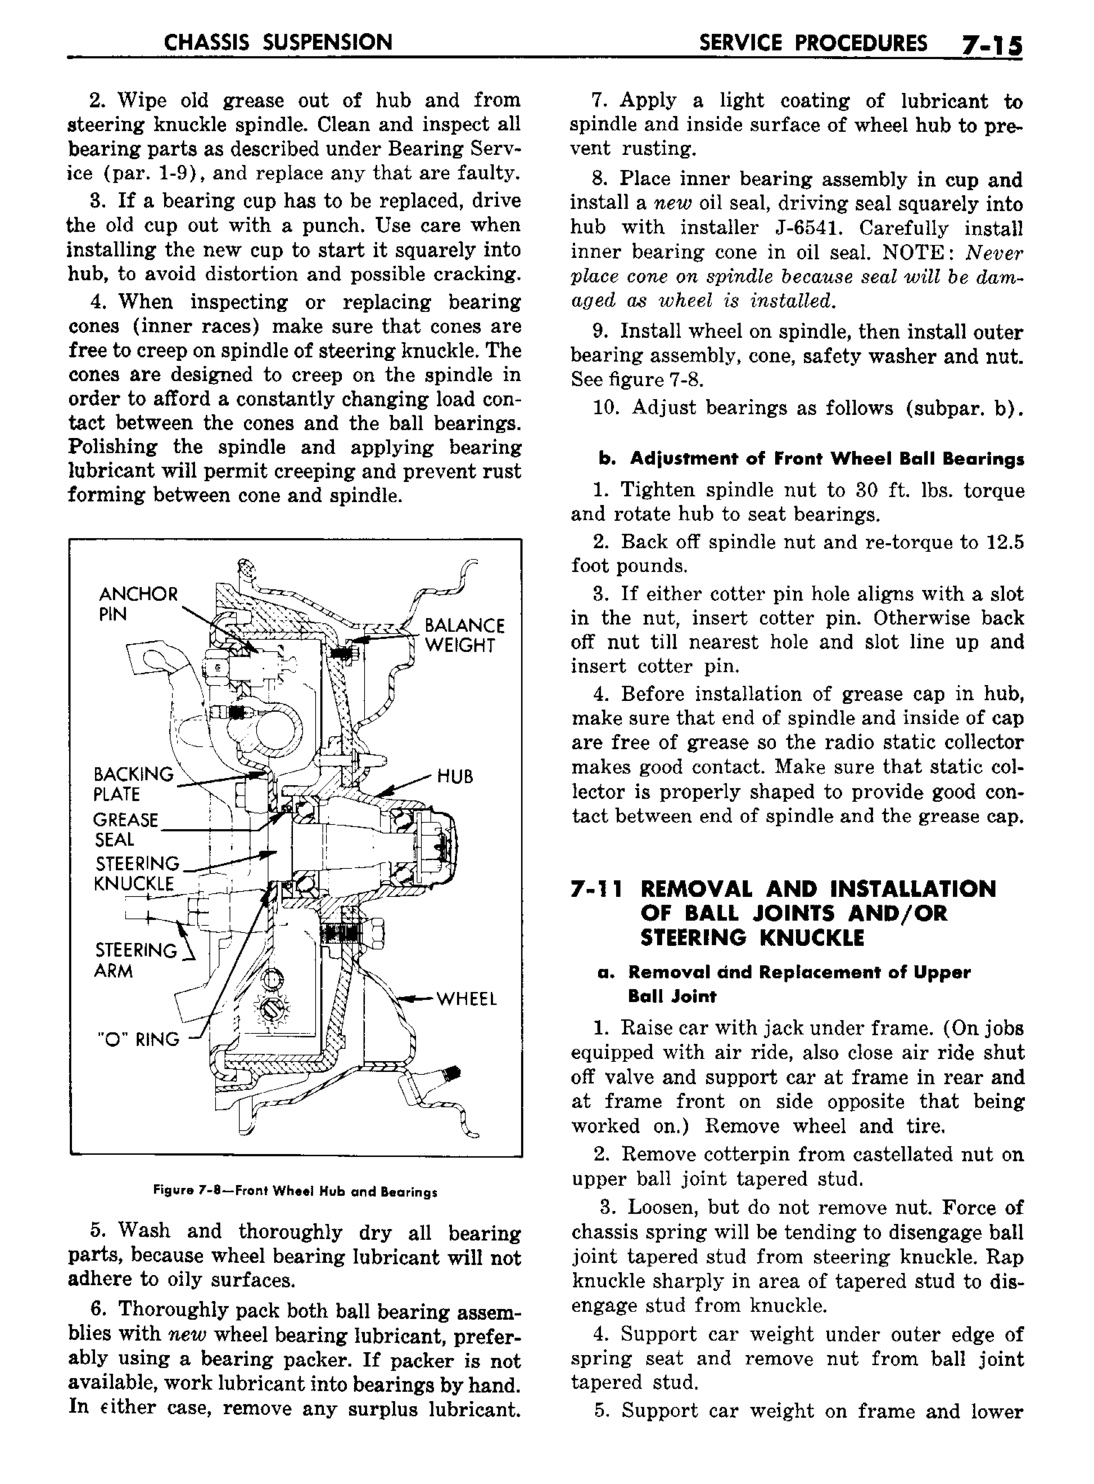 n_08 1960 Buick Shop Manual - Chassis Suspension-015-015.jpg